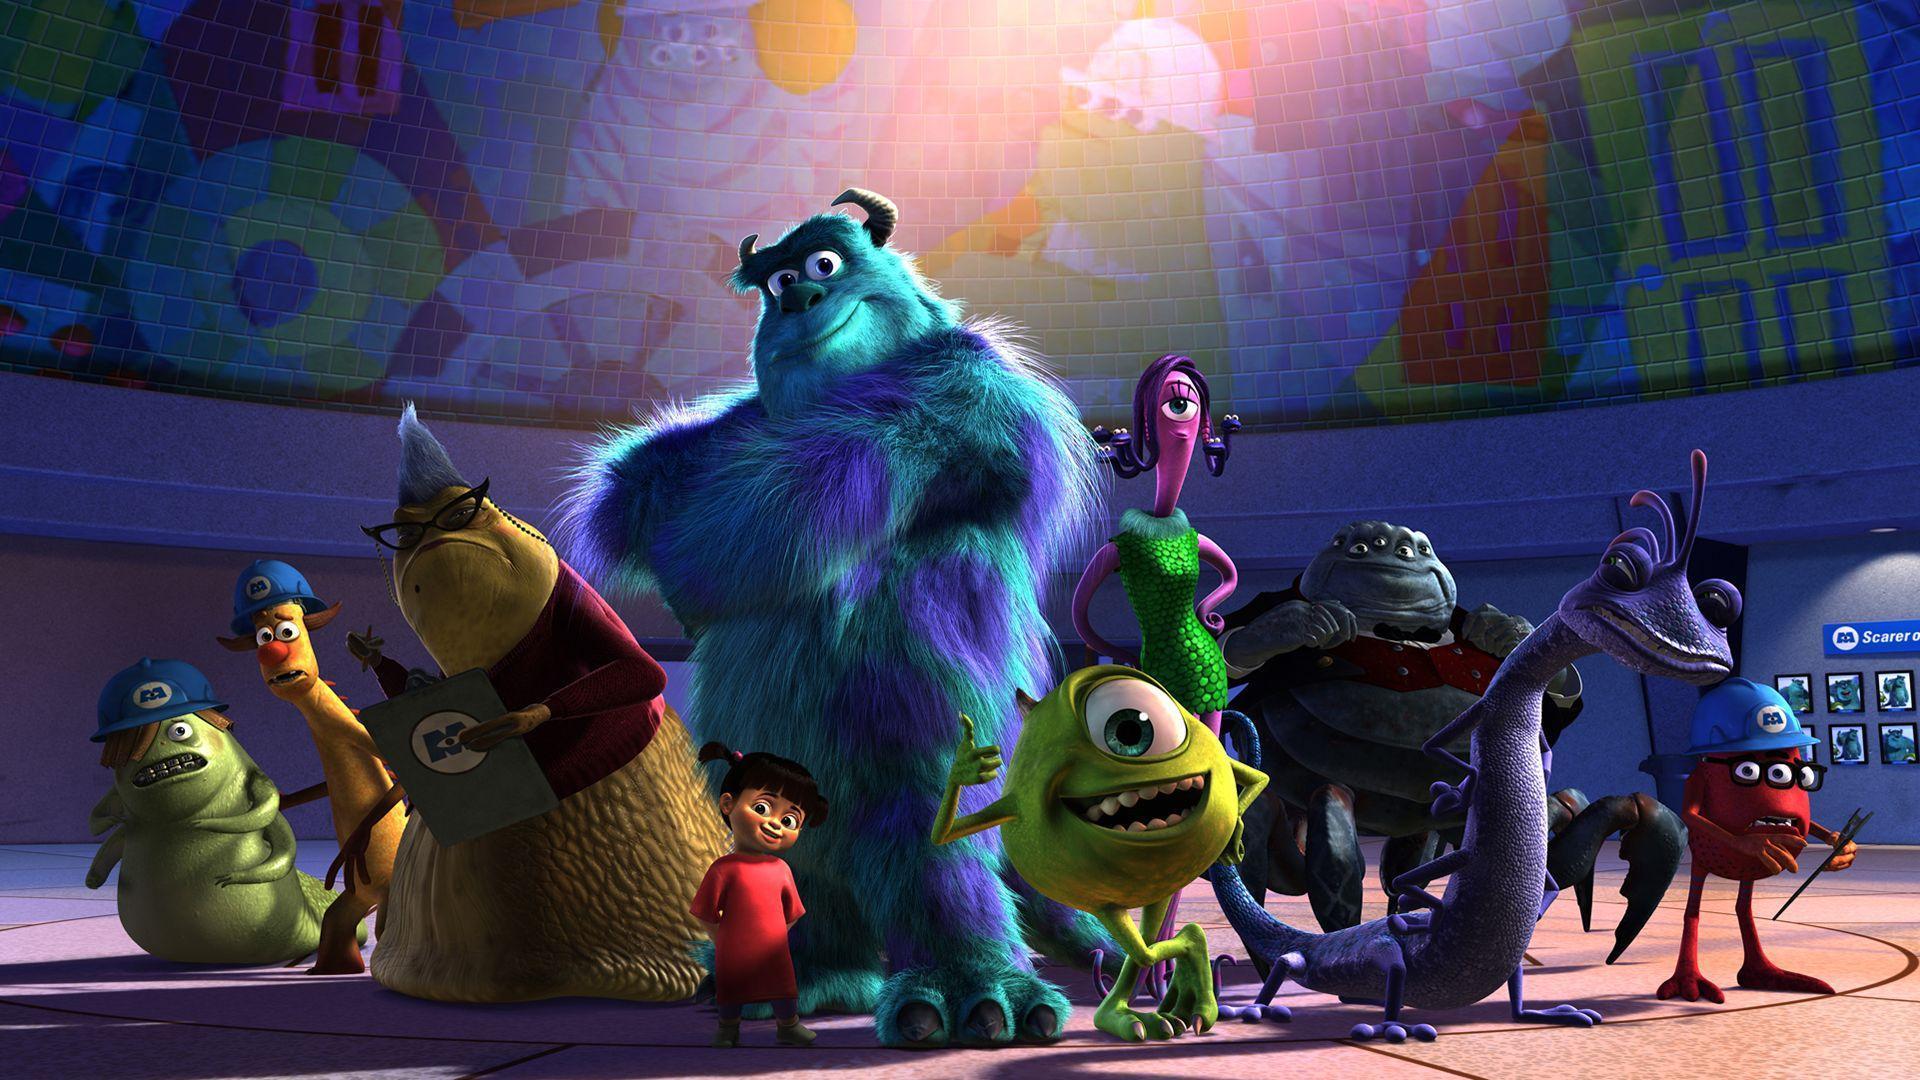 Monsters inc background and monsters university wallpaper hd